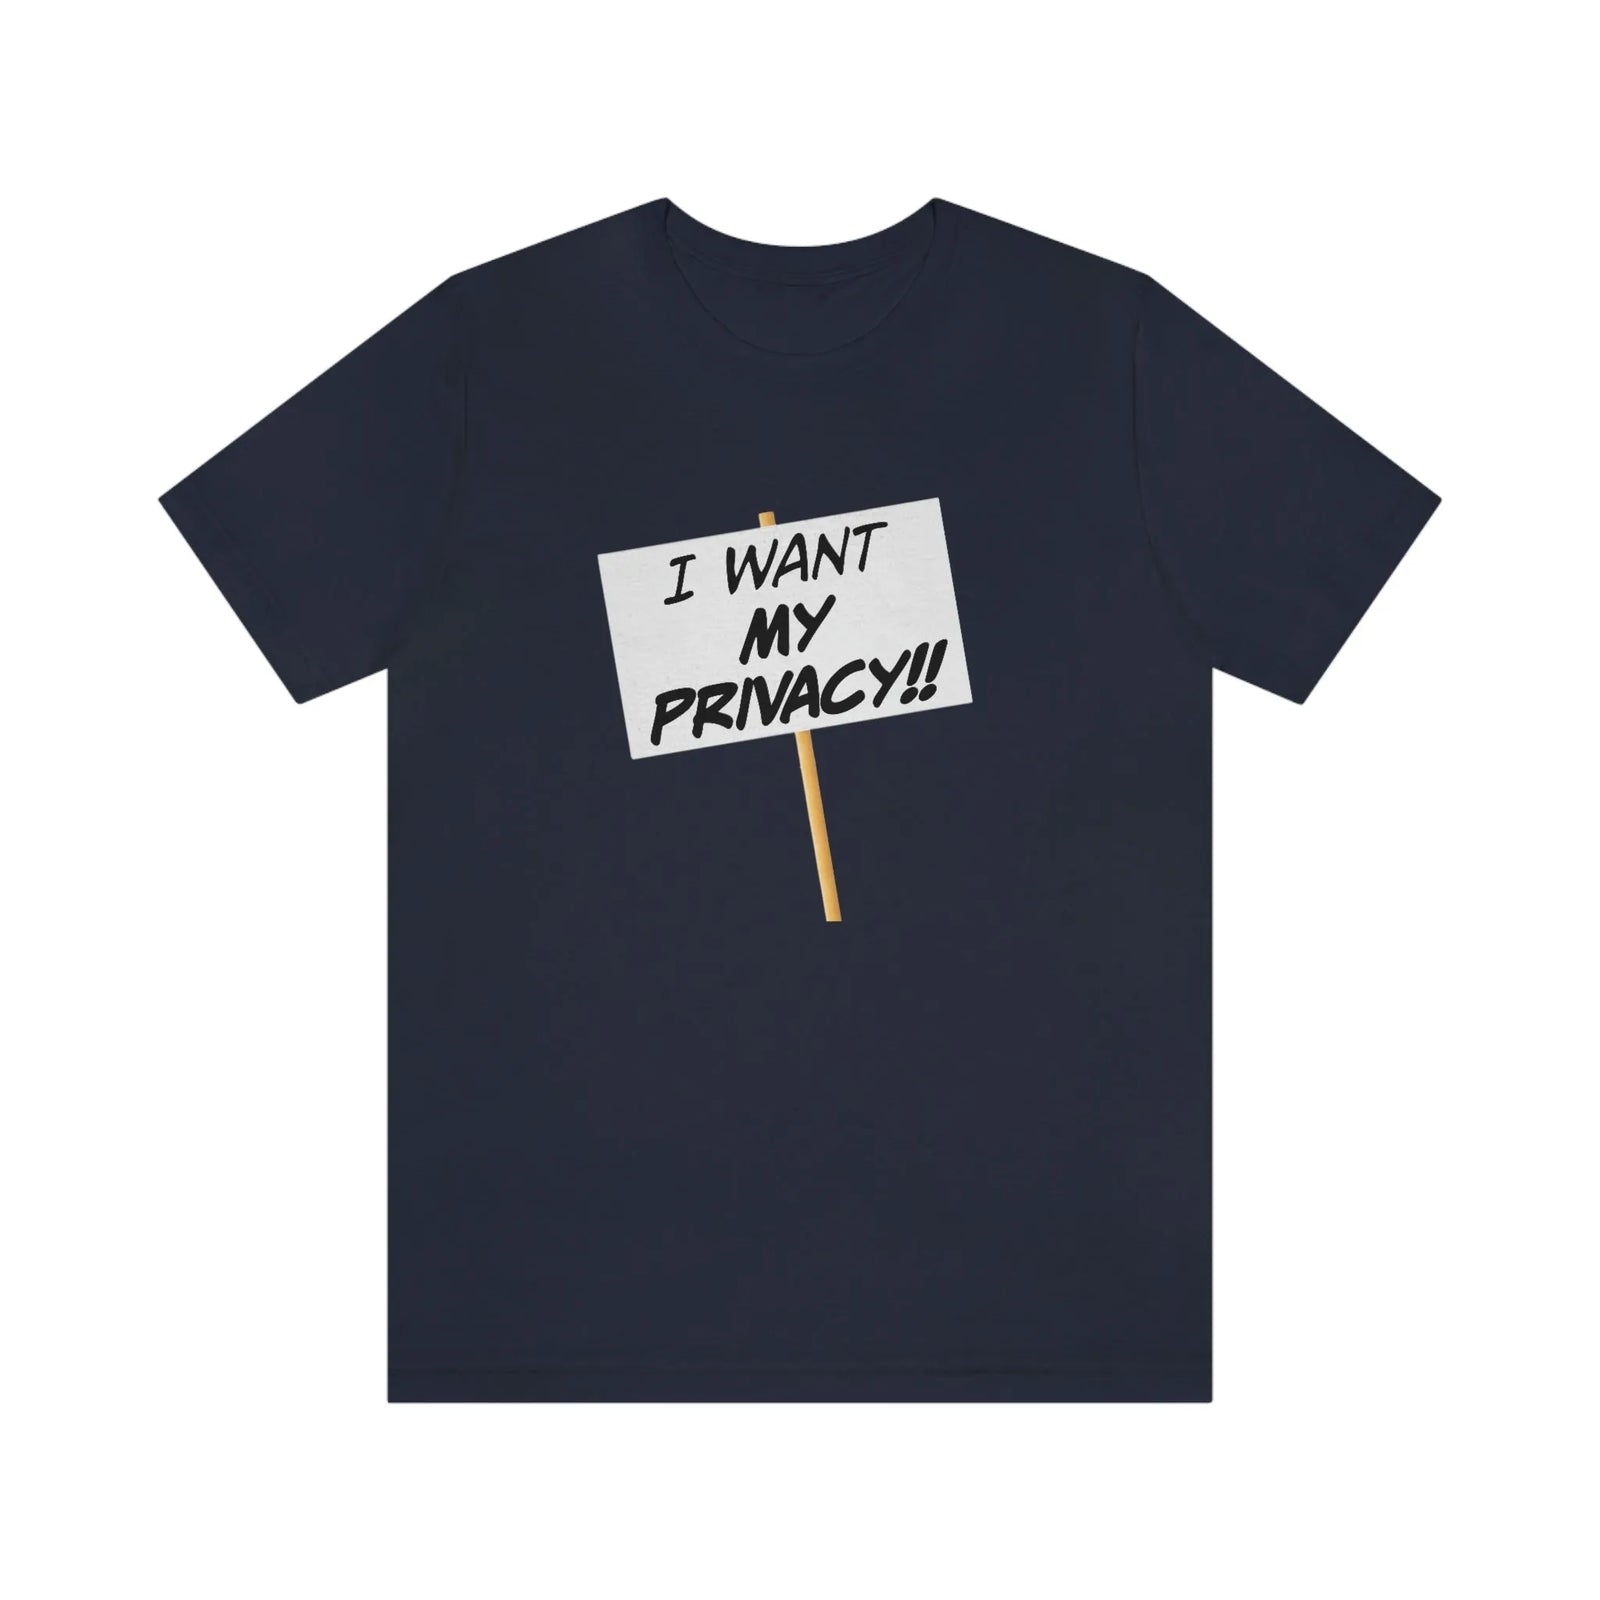 I Want My Privacy!! Unisex Jersey Short Sleeve Tee